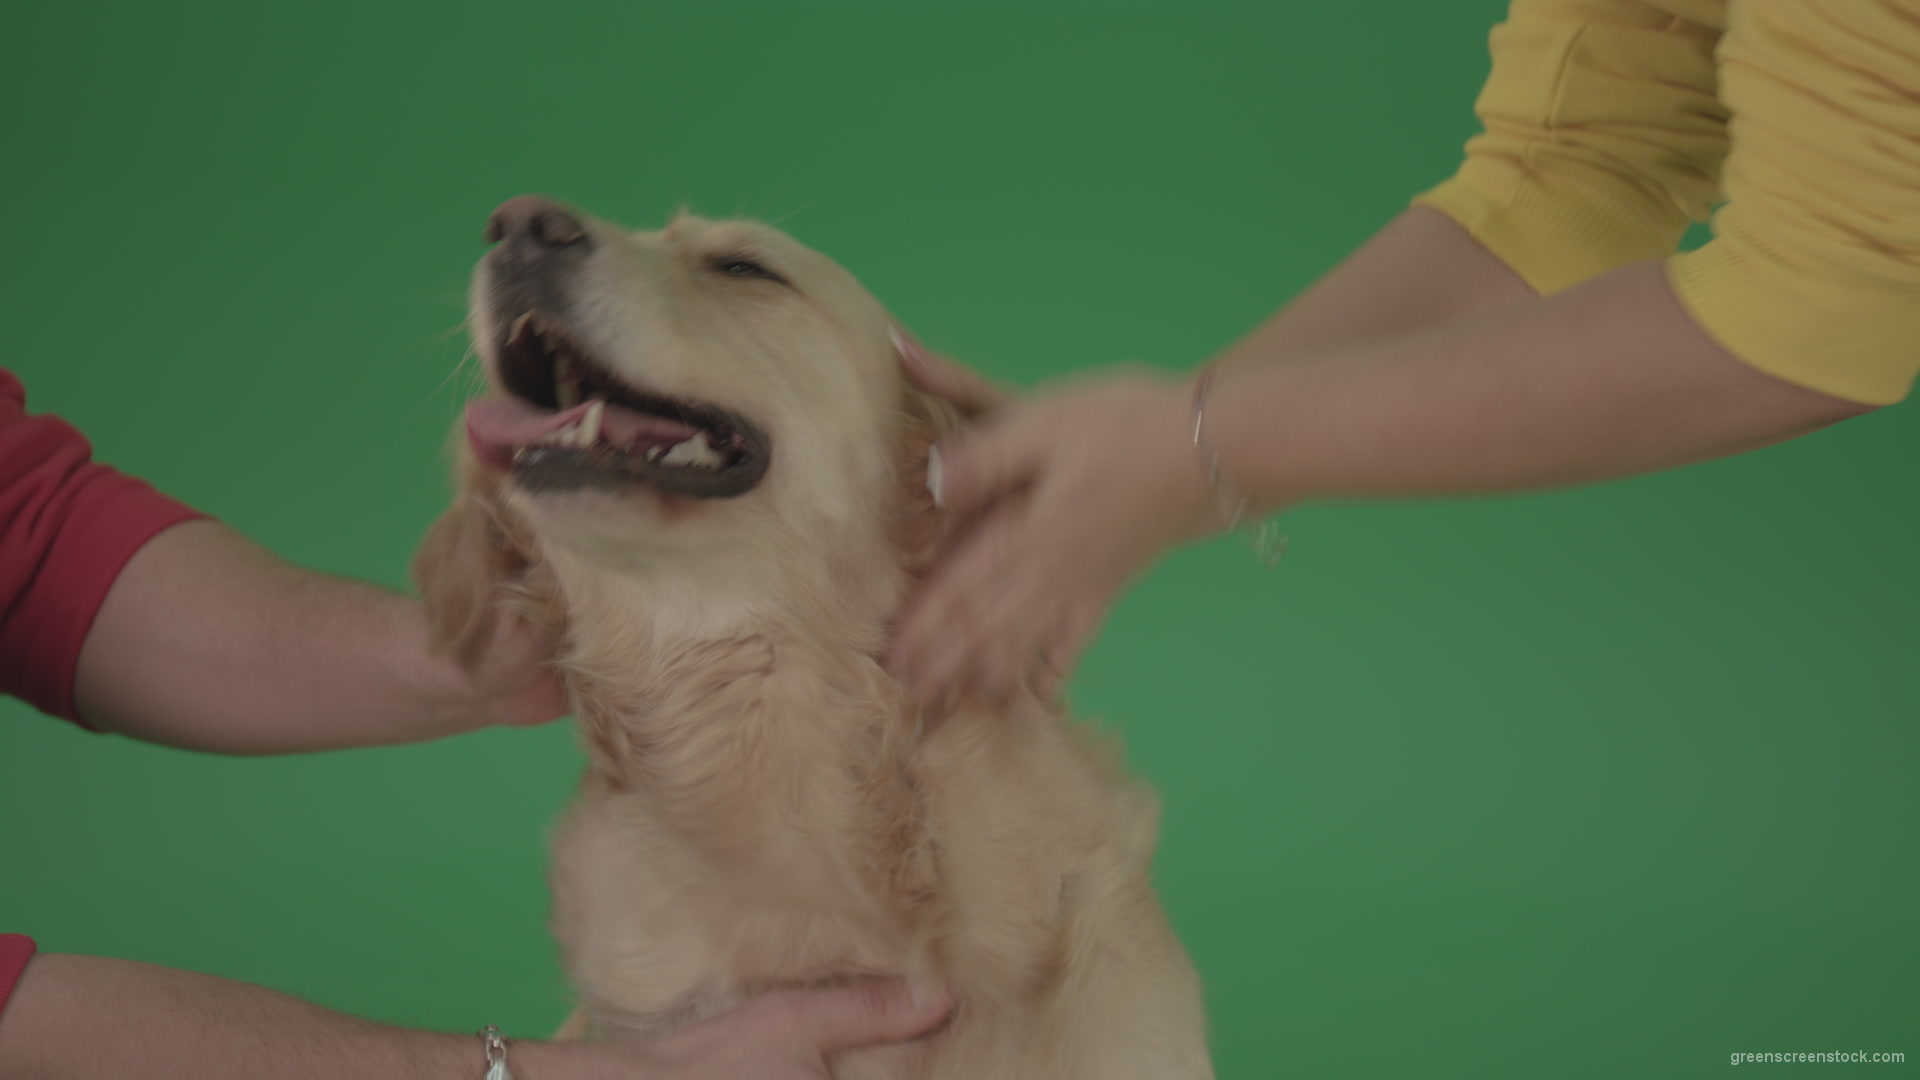 Funny-Golden-Retriever-owners-stroke-from-two-hands-hunter-Dog-isolated-on-green-screen-4K-video-footage_007 Green Screen Stock